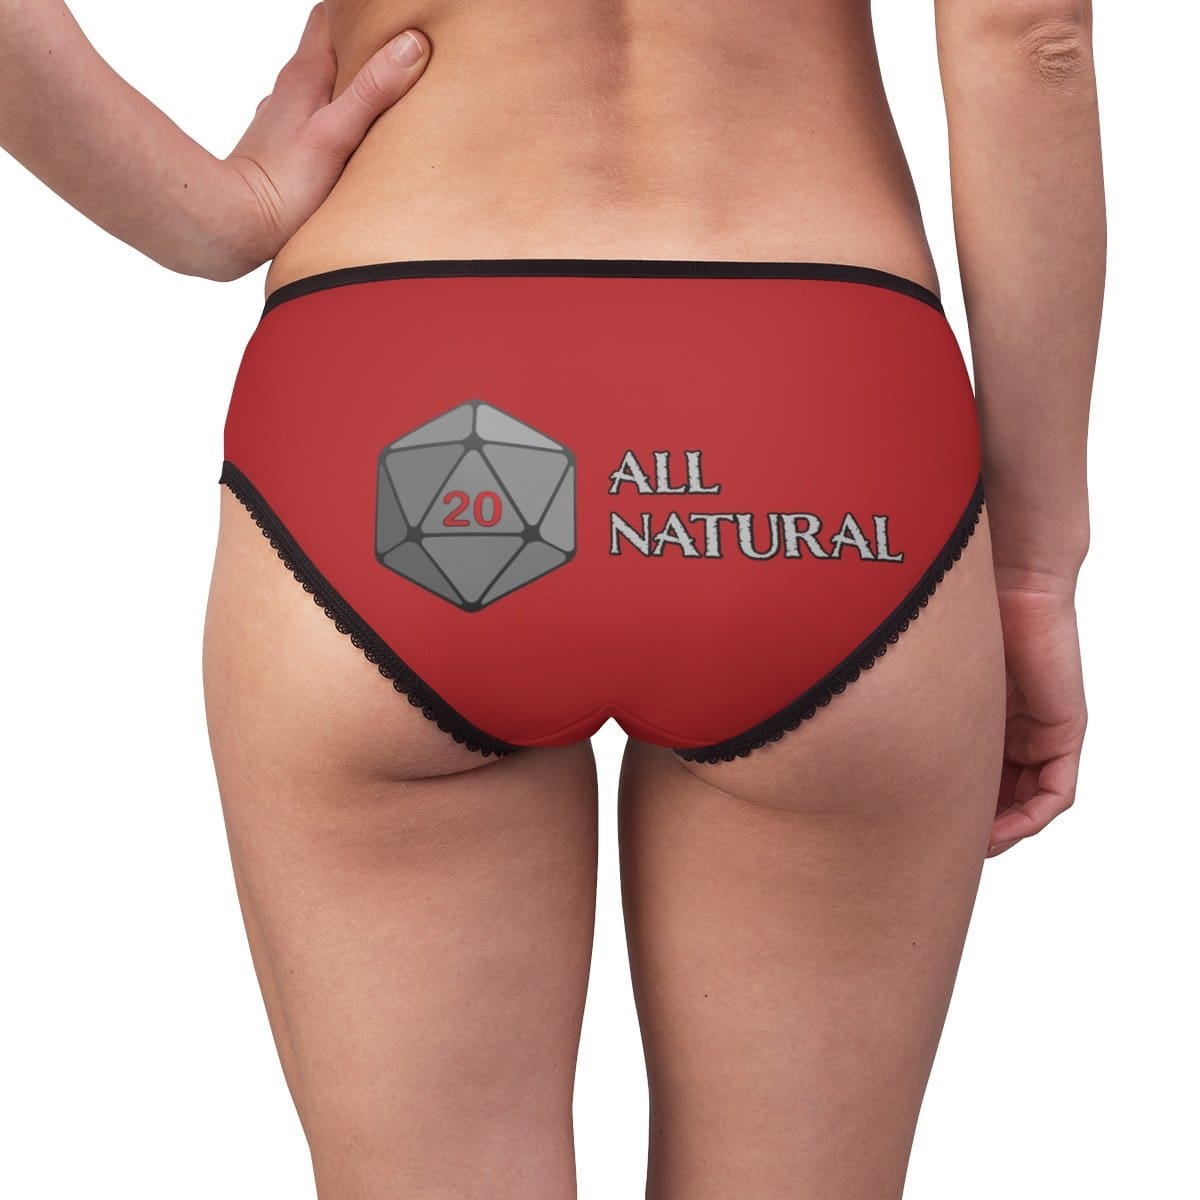 D20 All Natural - Grey on Red Womens Briefs - L / Black Seams - All Over Prints